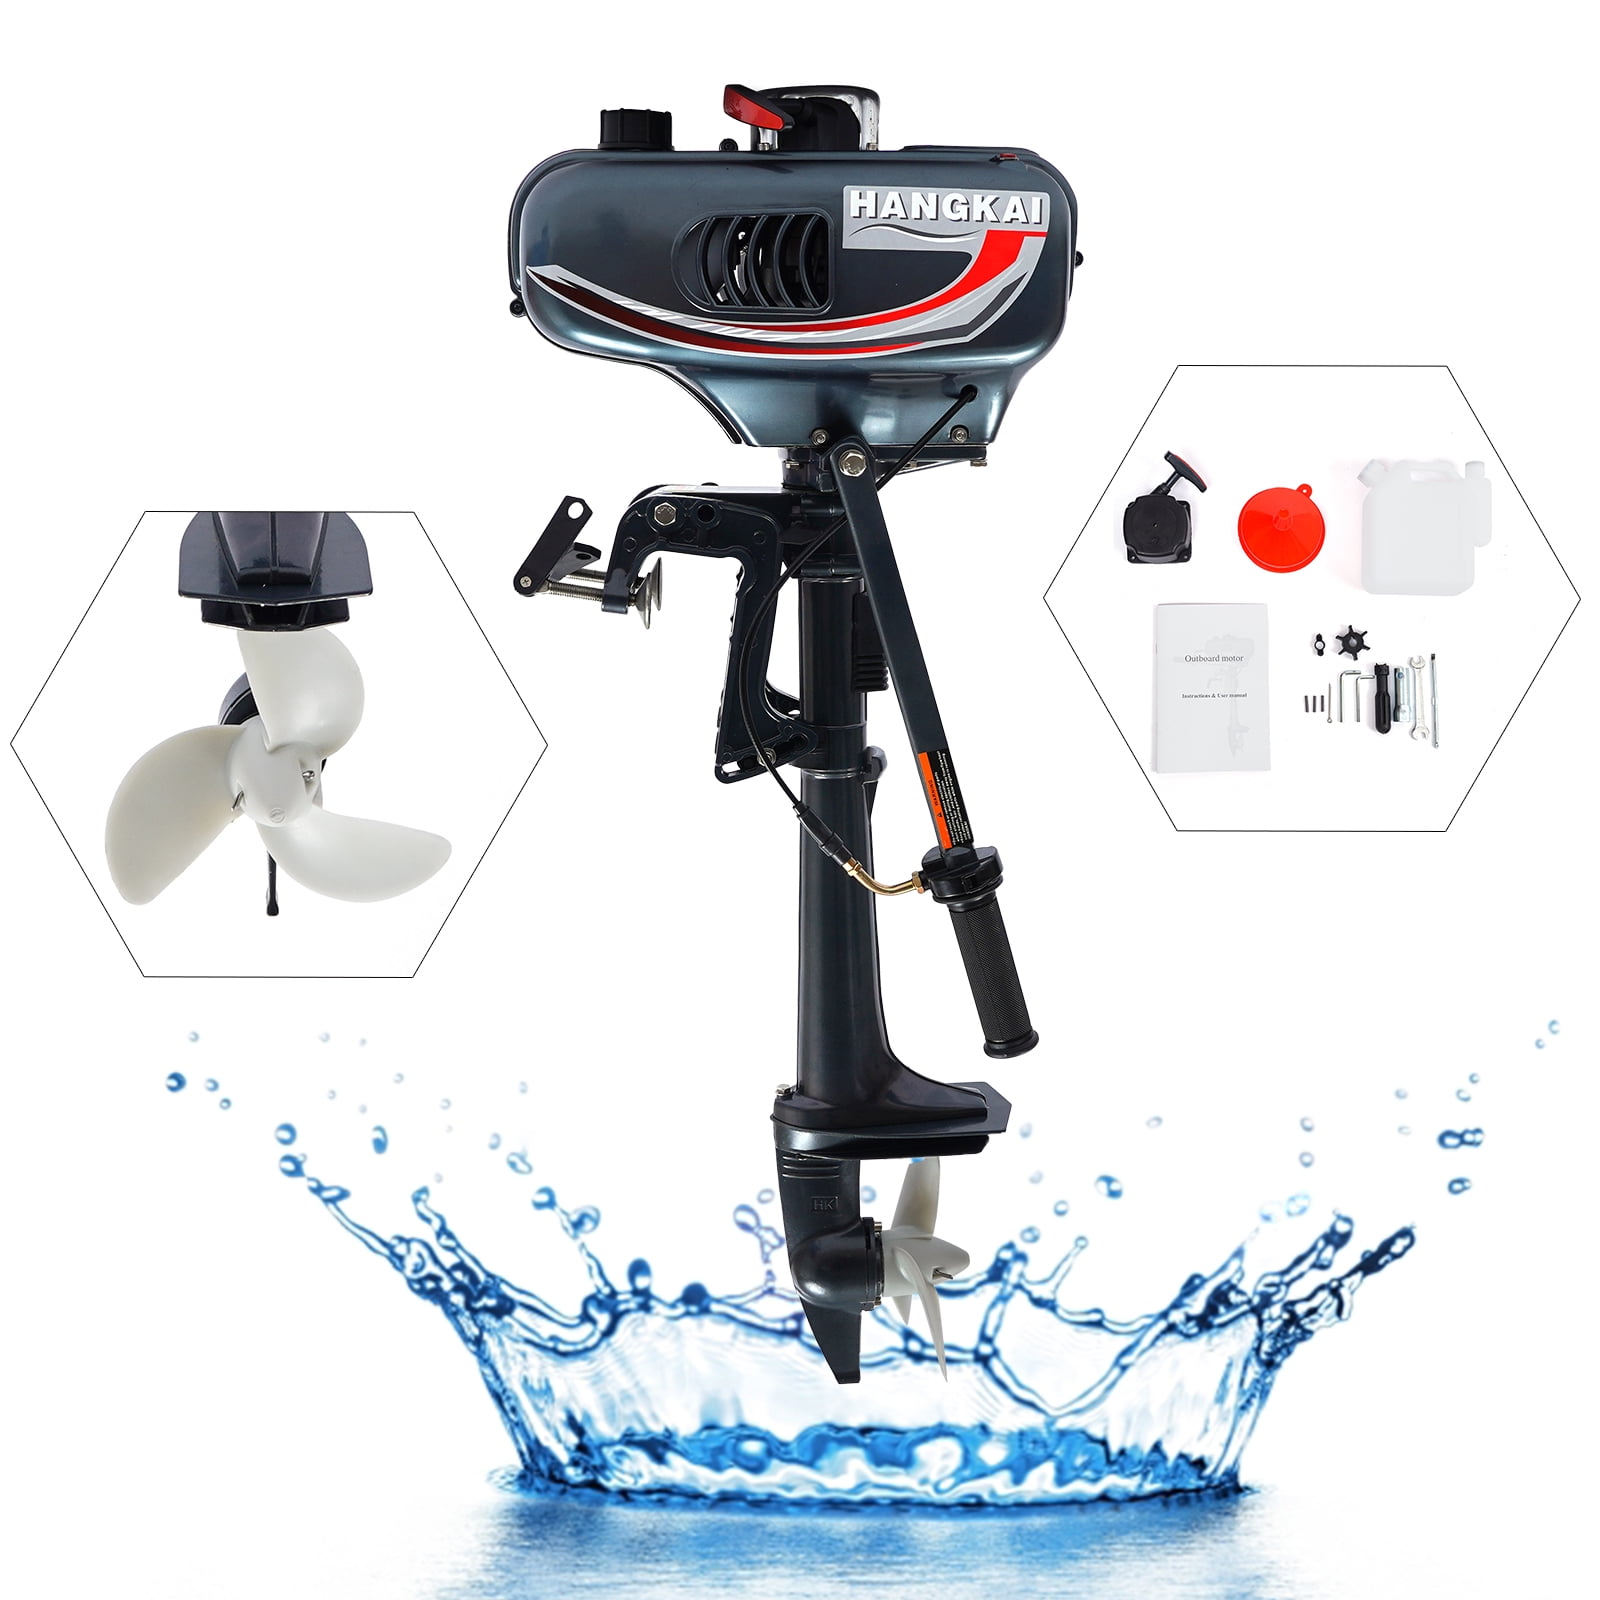 2 Stroke Outboard Motor 3.5HP Fish Boat Engine Water Cooling System CDI 2500W 